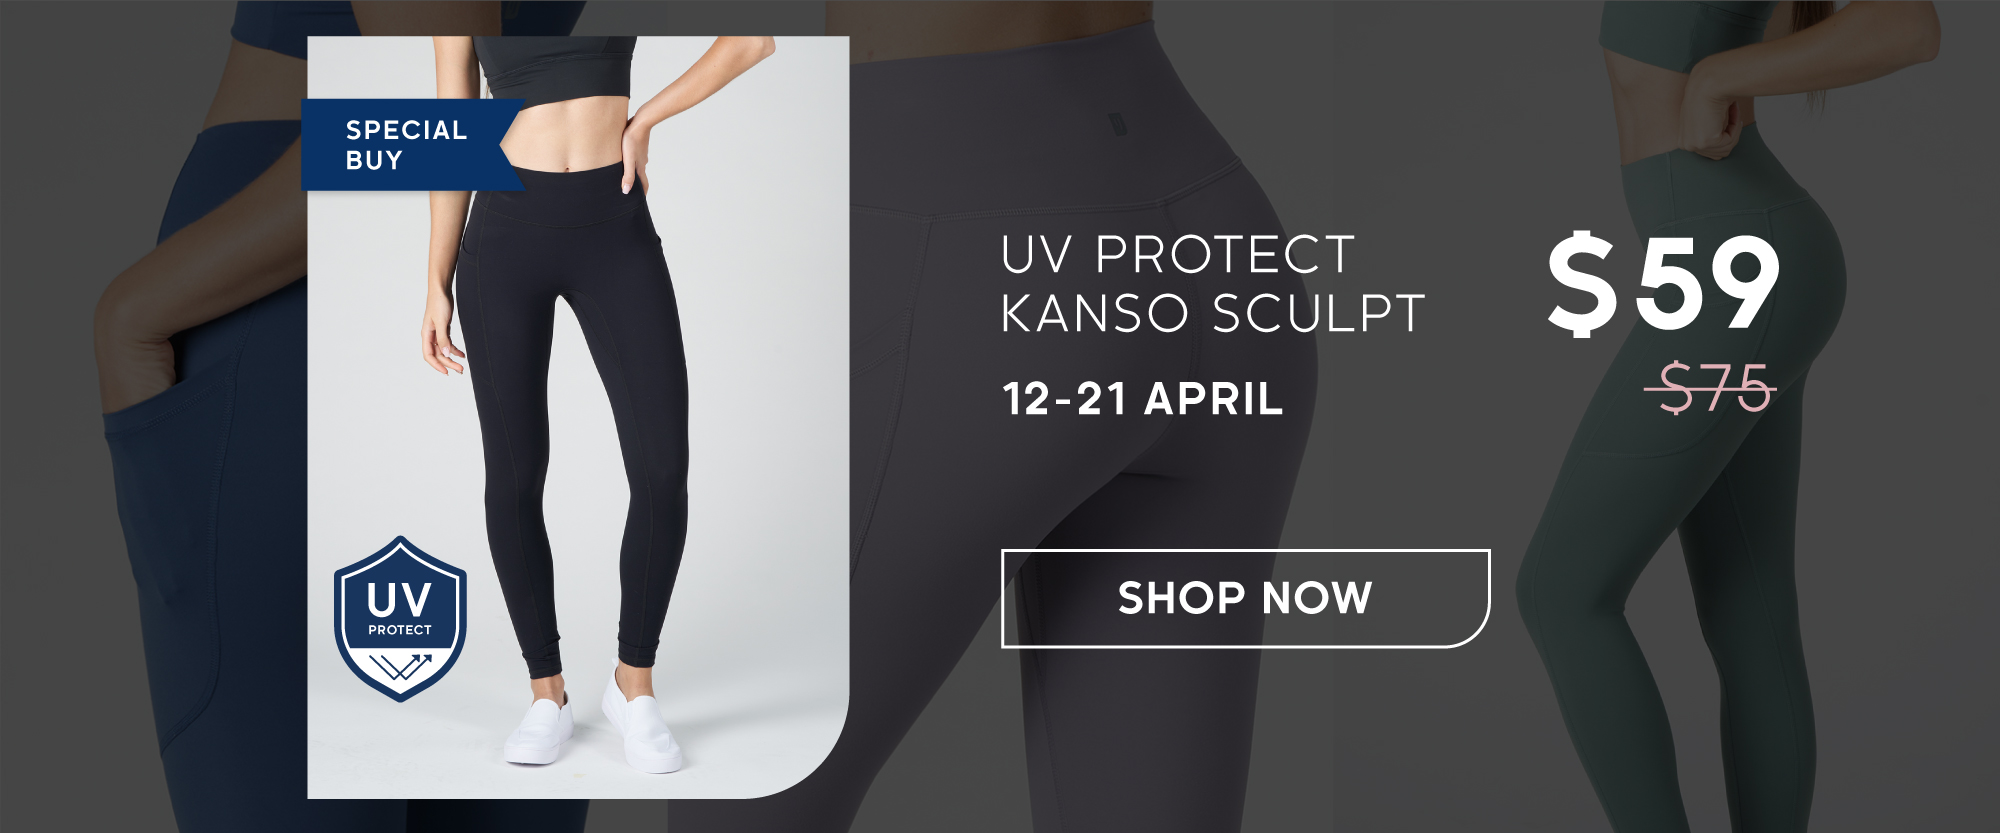 UV Protect Kanso Sculpt special buy